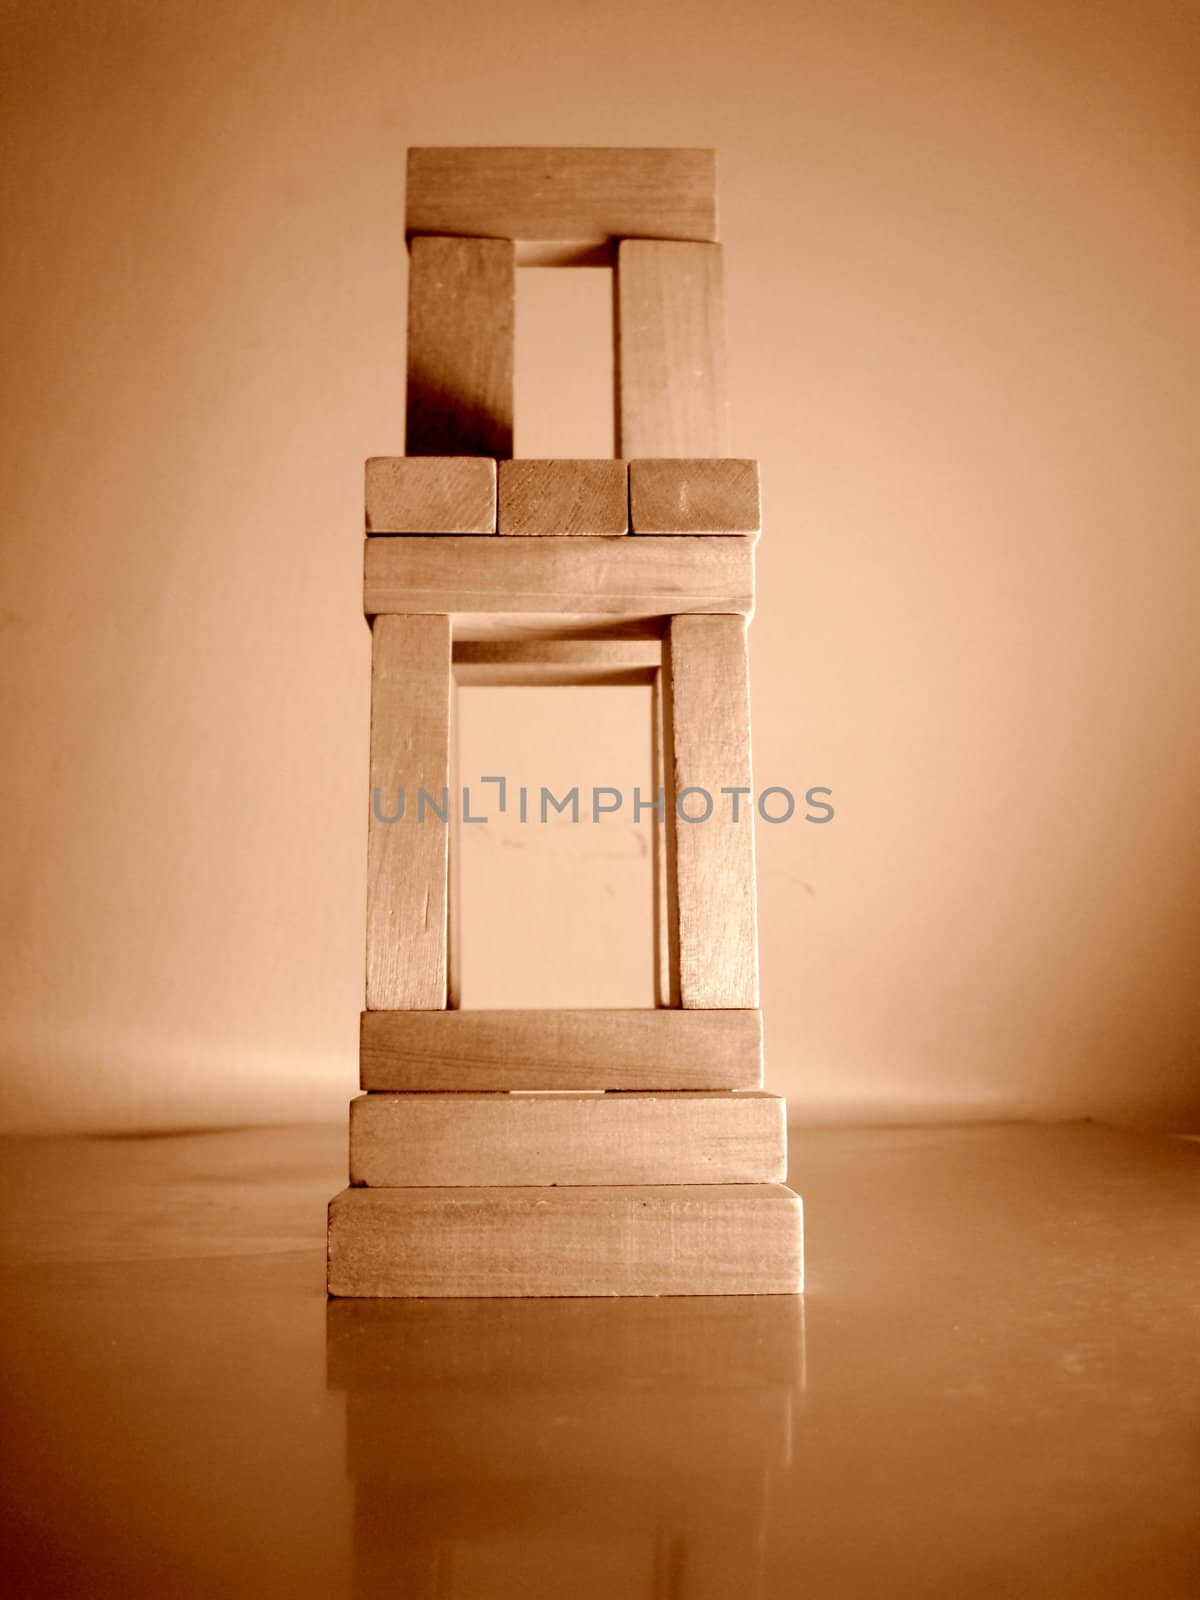 a chair made with wooden block, metaphor step for wealth and power, leadership